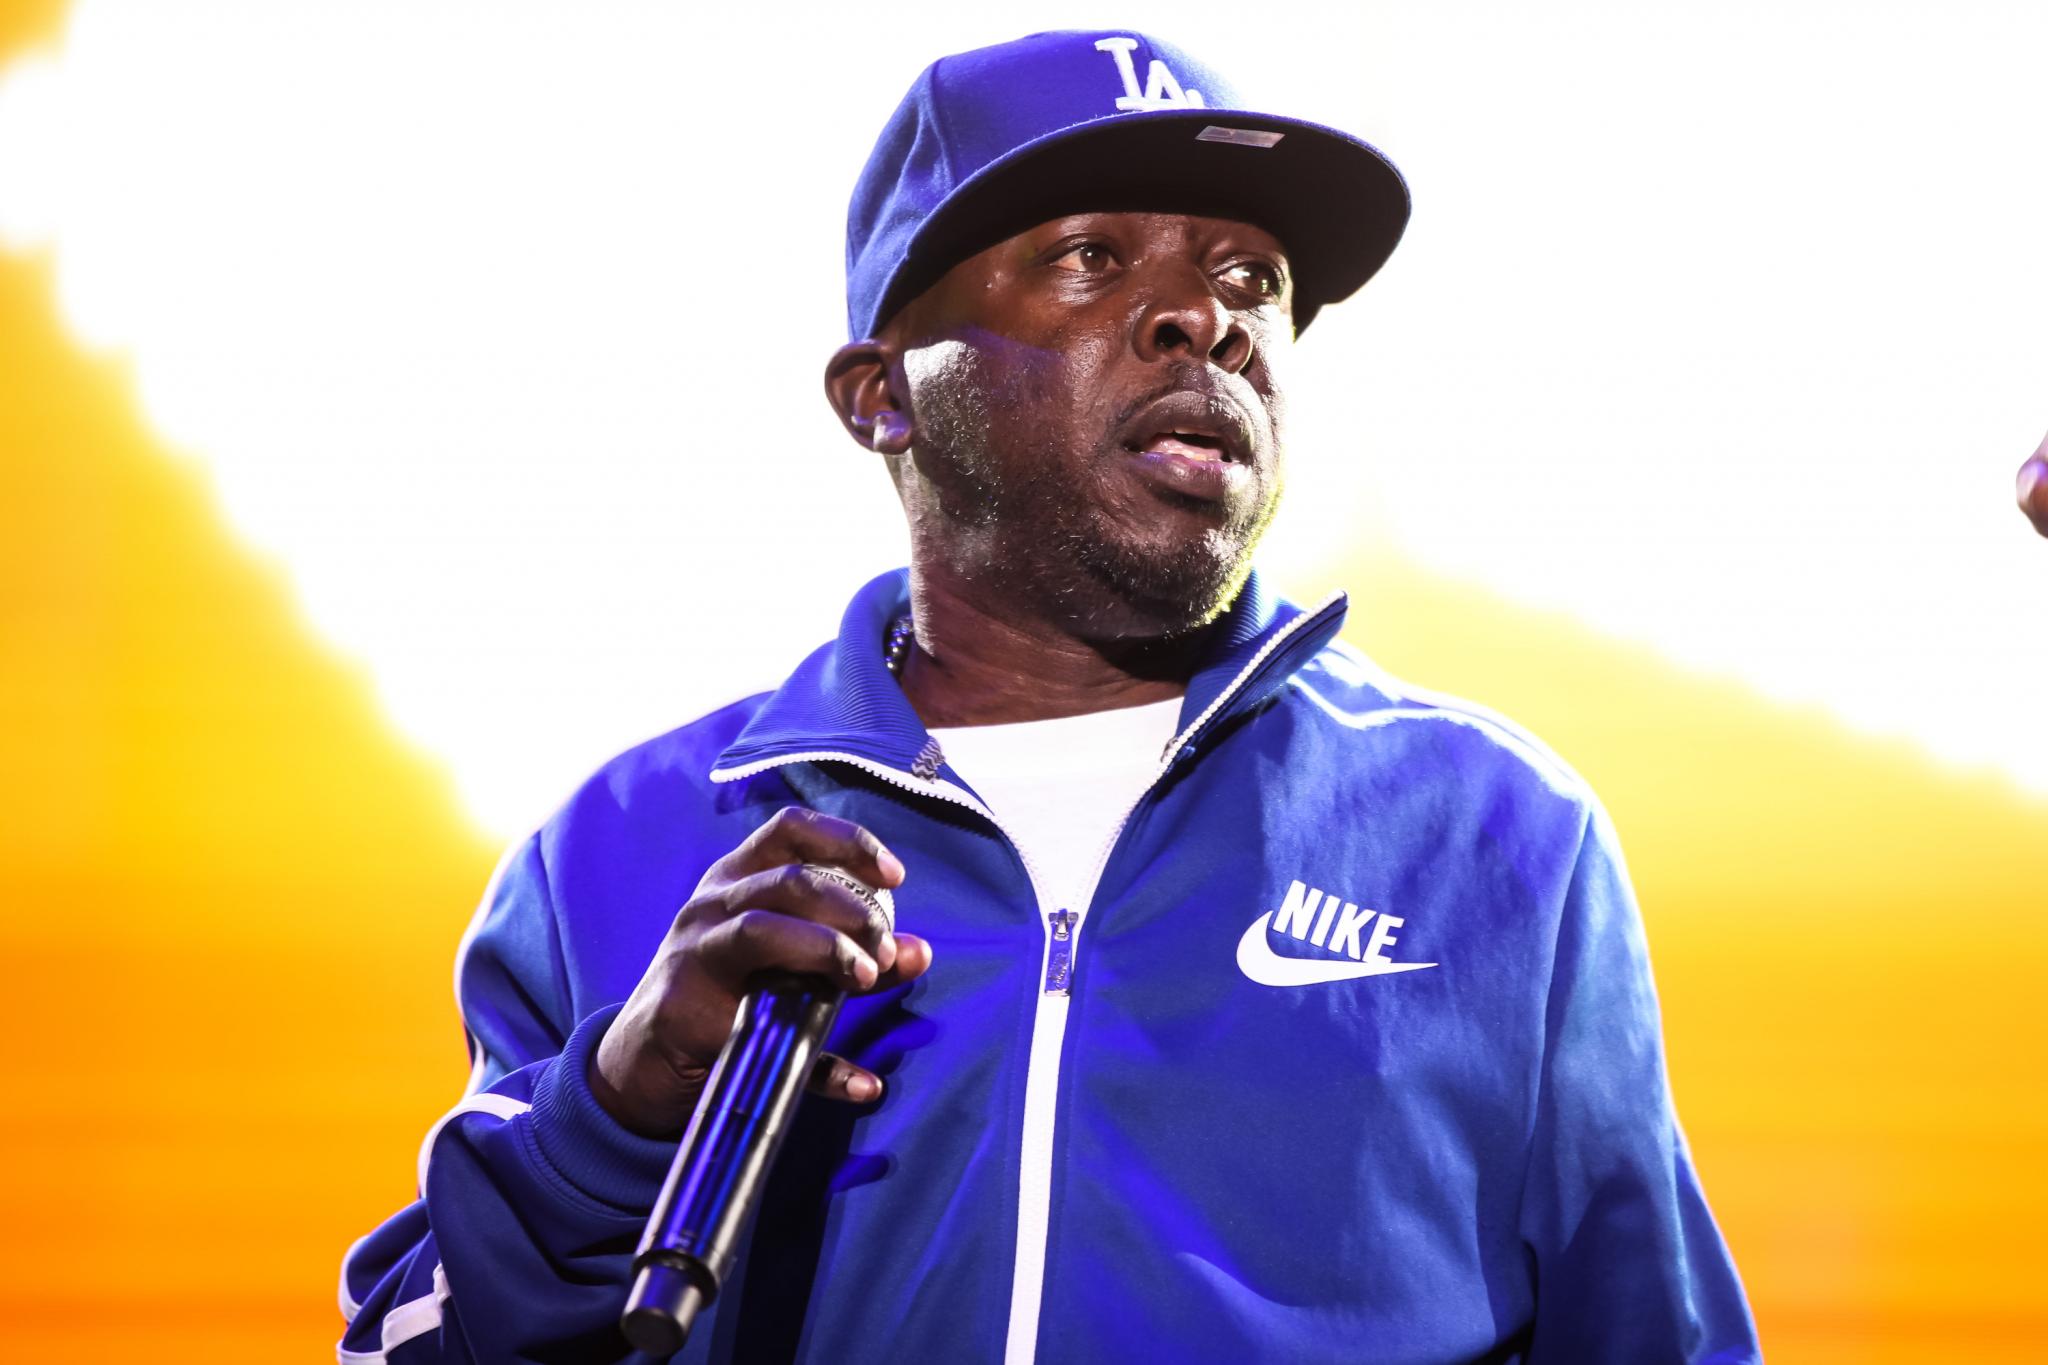 A Tribe Called Quest to Celebrate Phife Dawg's Life With Special Event